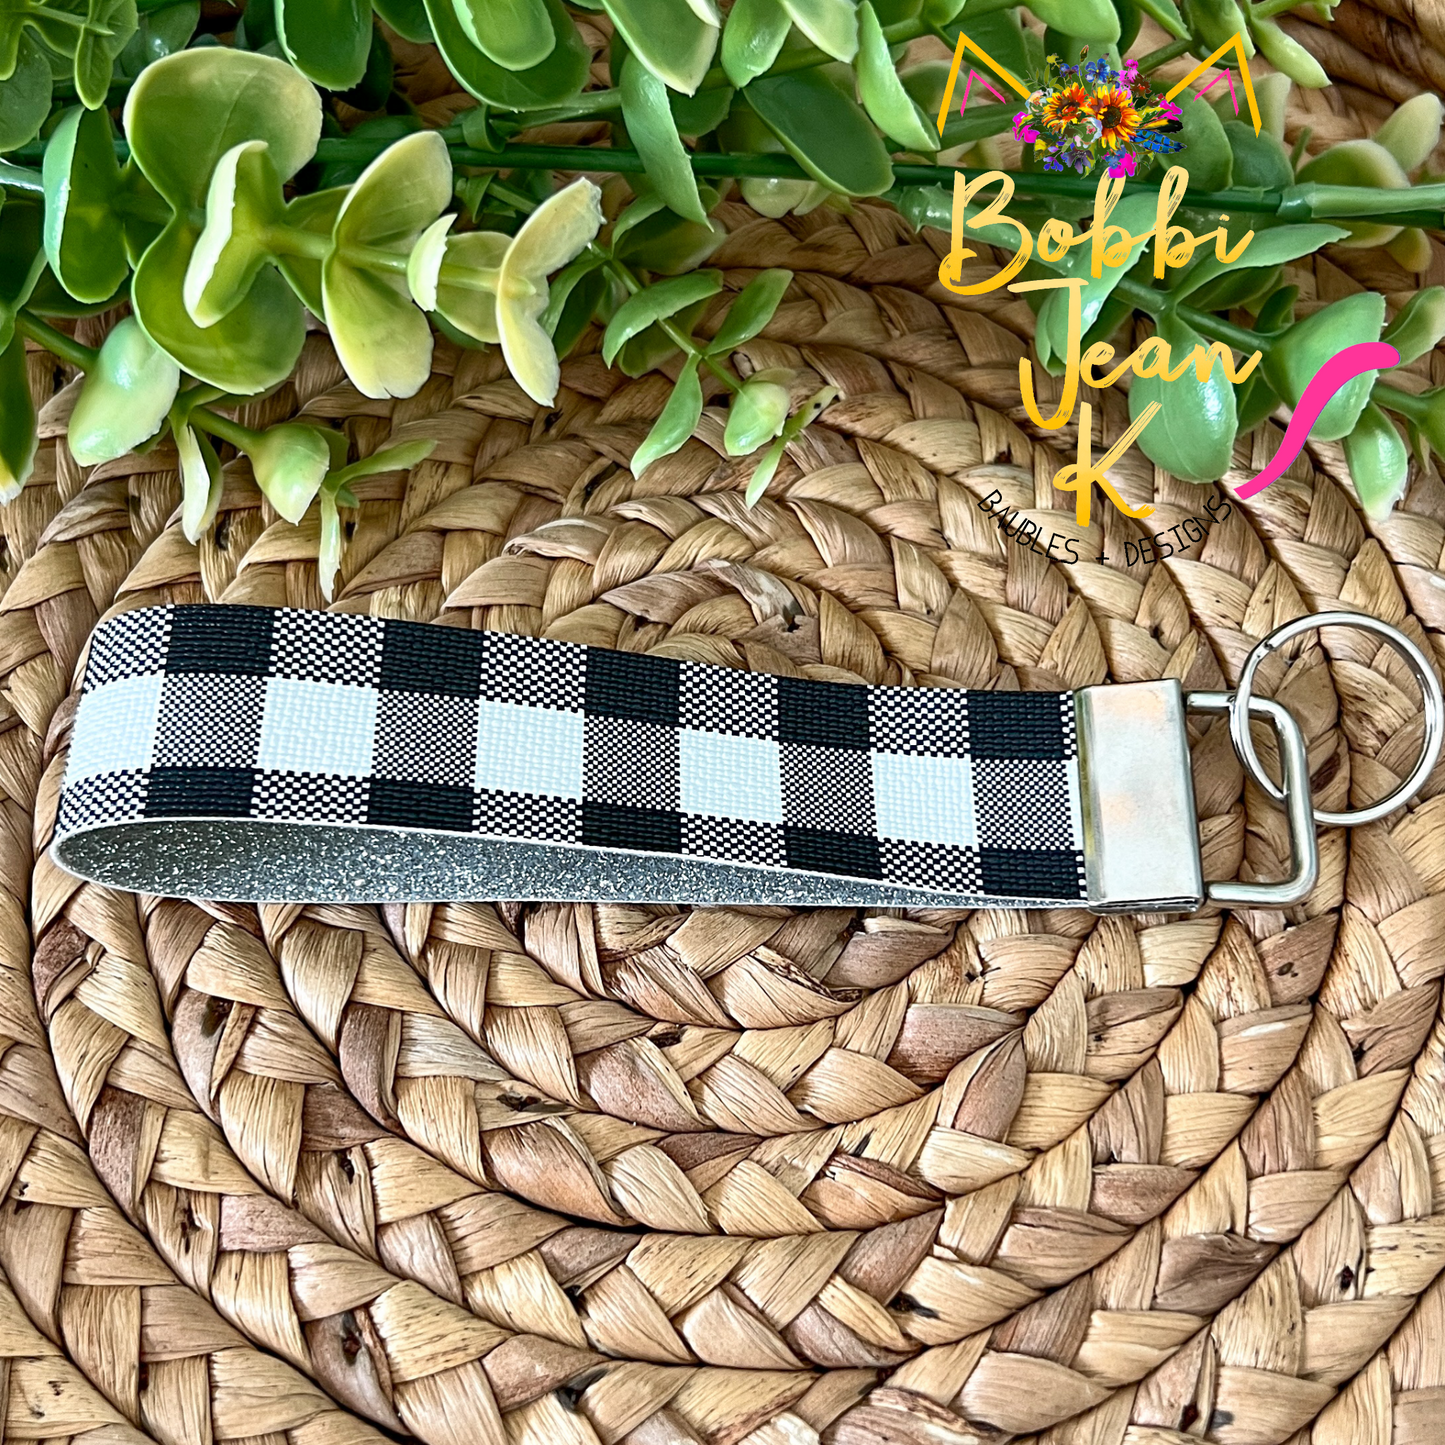 Black & White Plaid Key Fob with Silver Glittered Inside: Choose Silver or Black Clasp